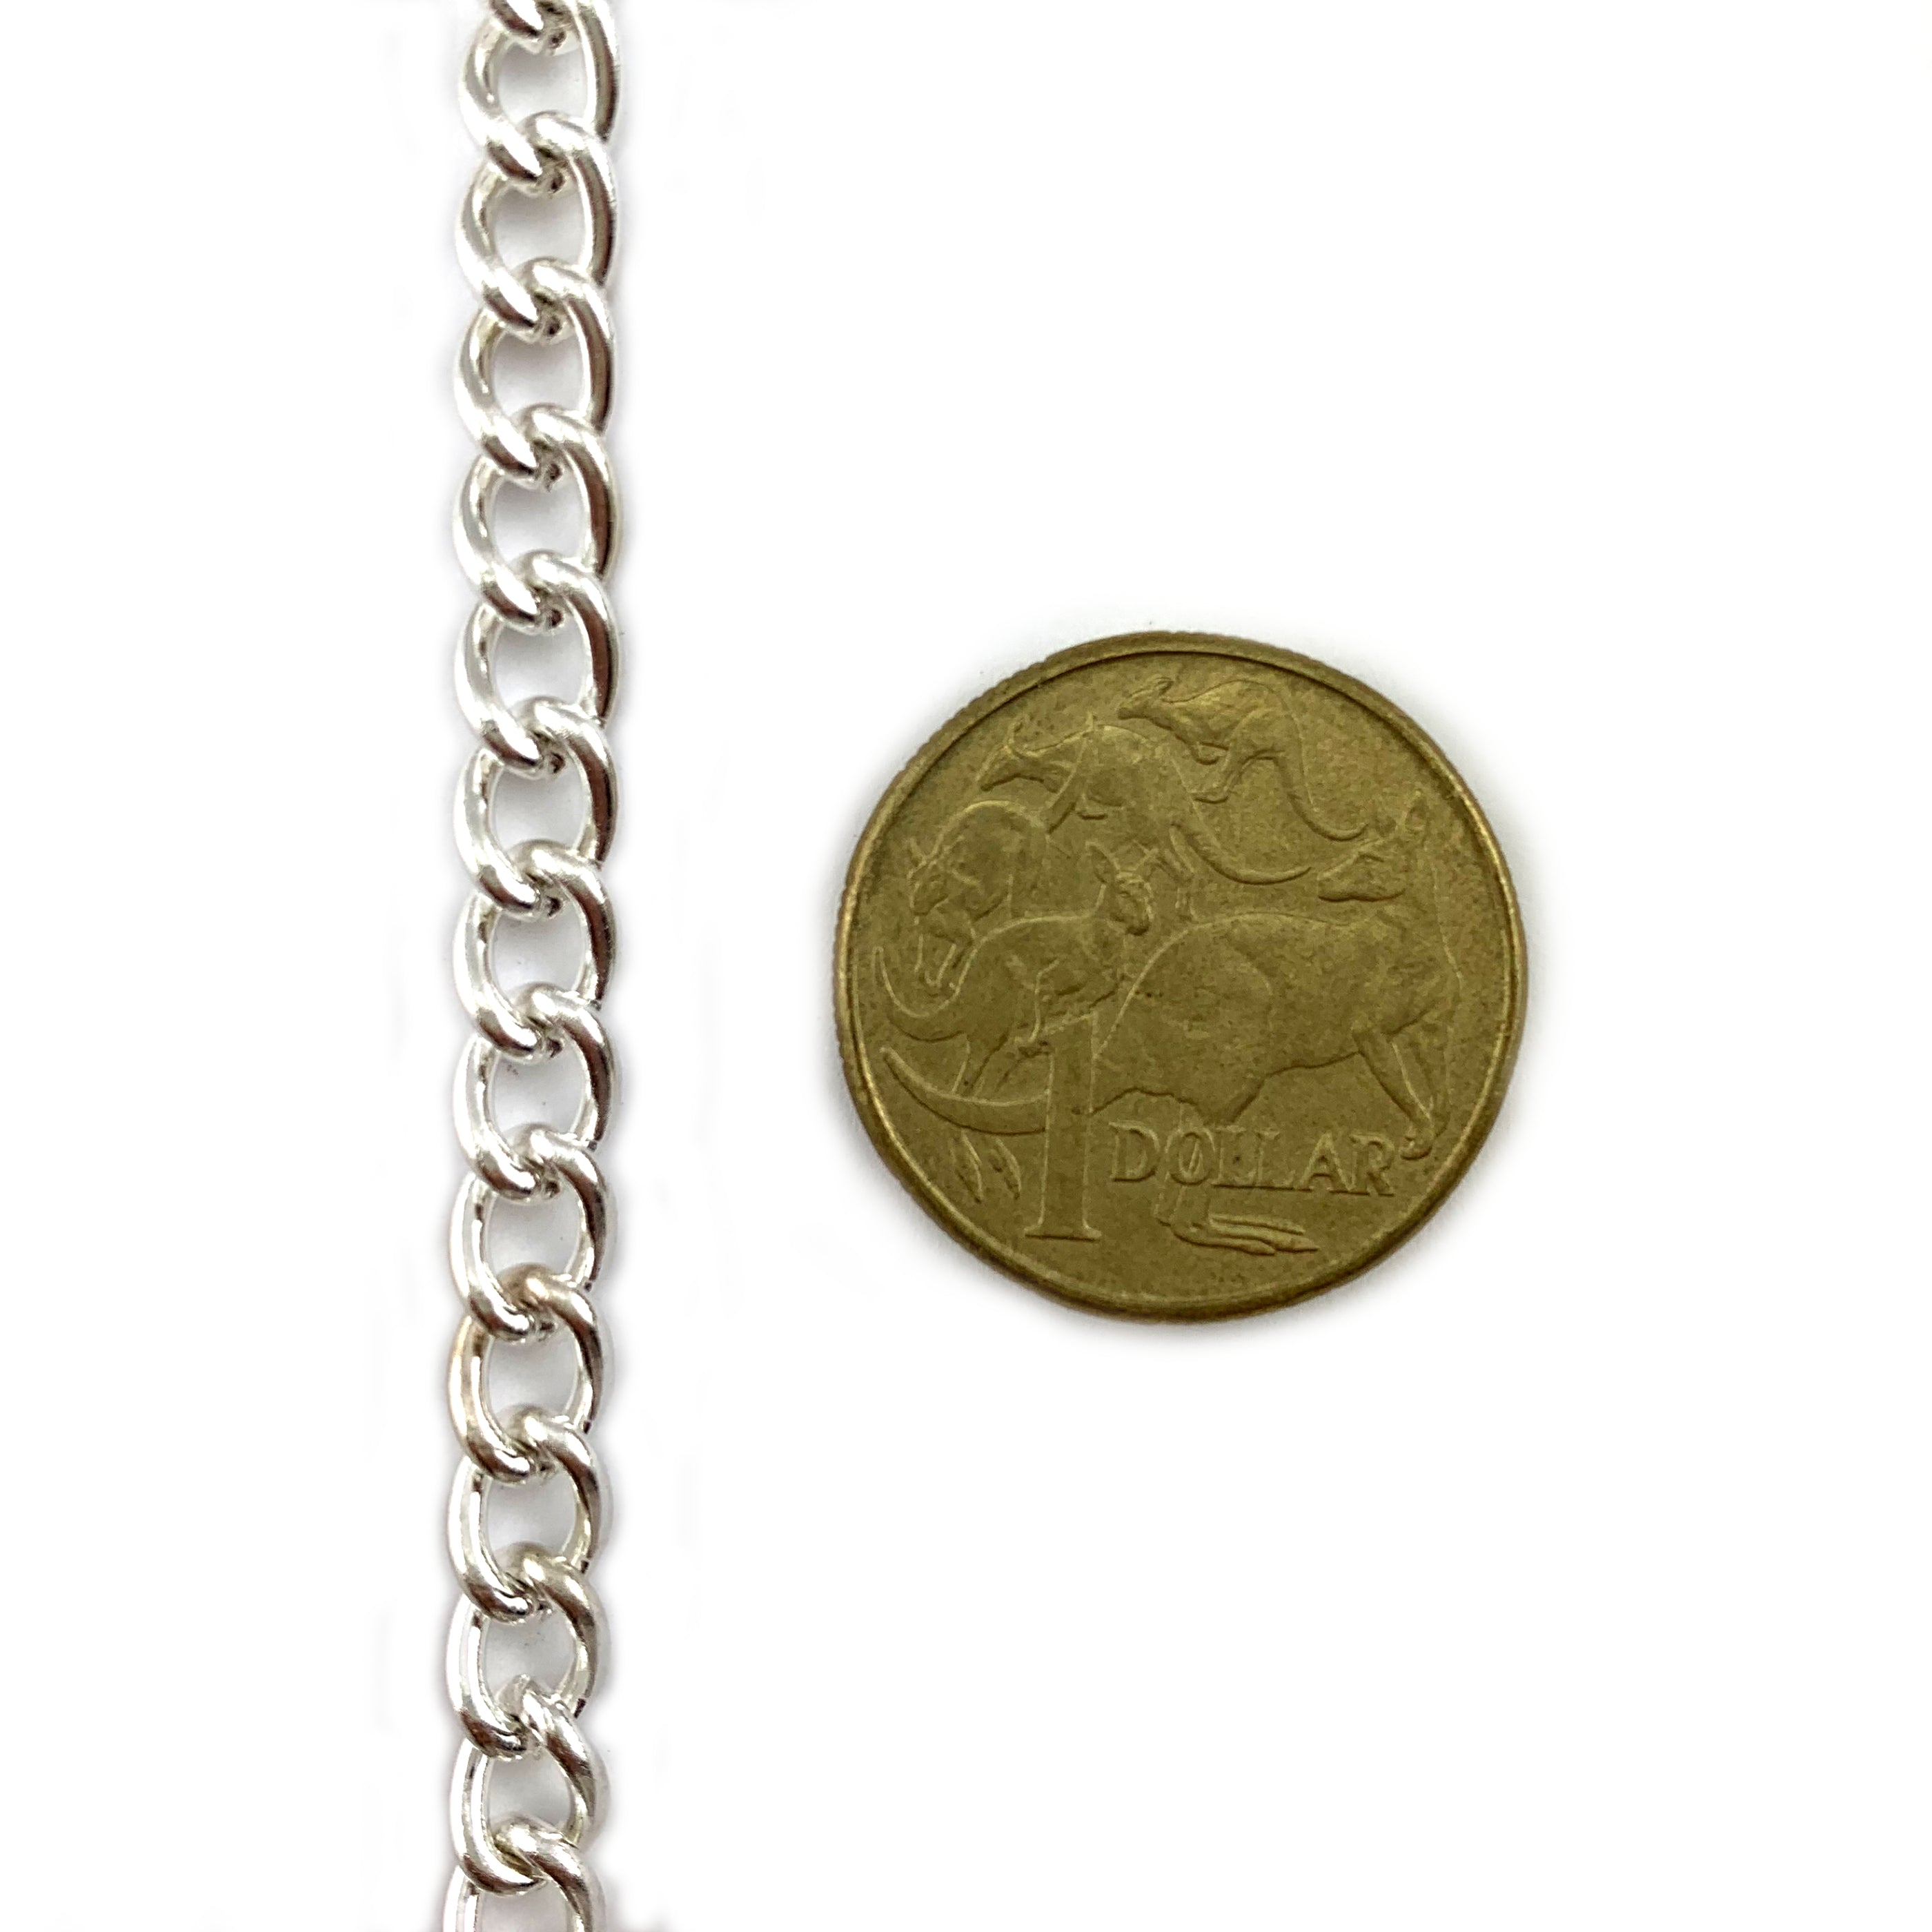 Curb Jewellery Chain in a Silver Plated finish, size C150. Melbourne, Australia.